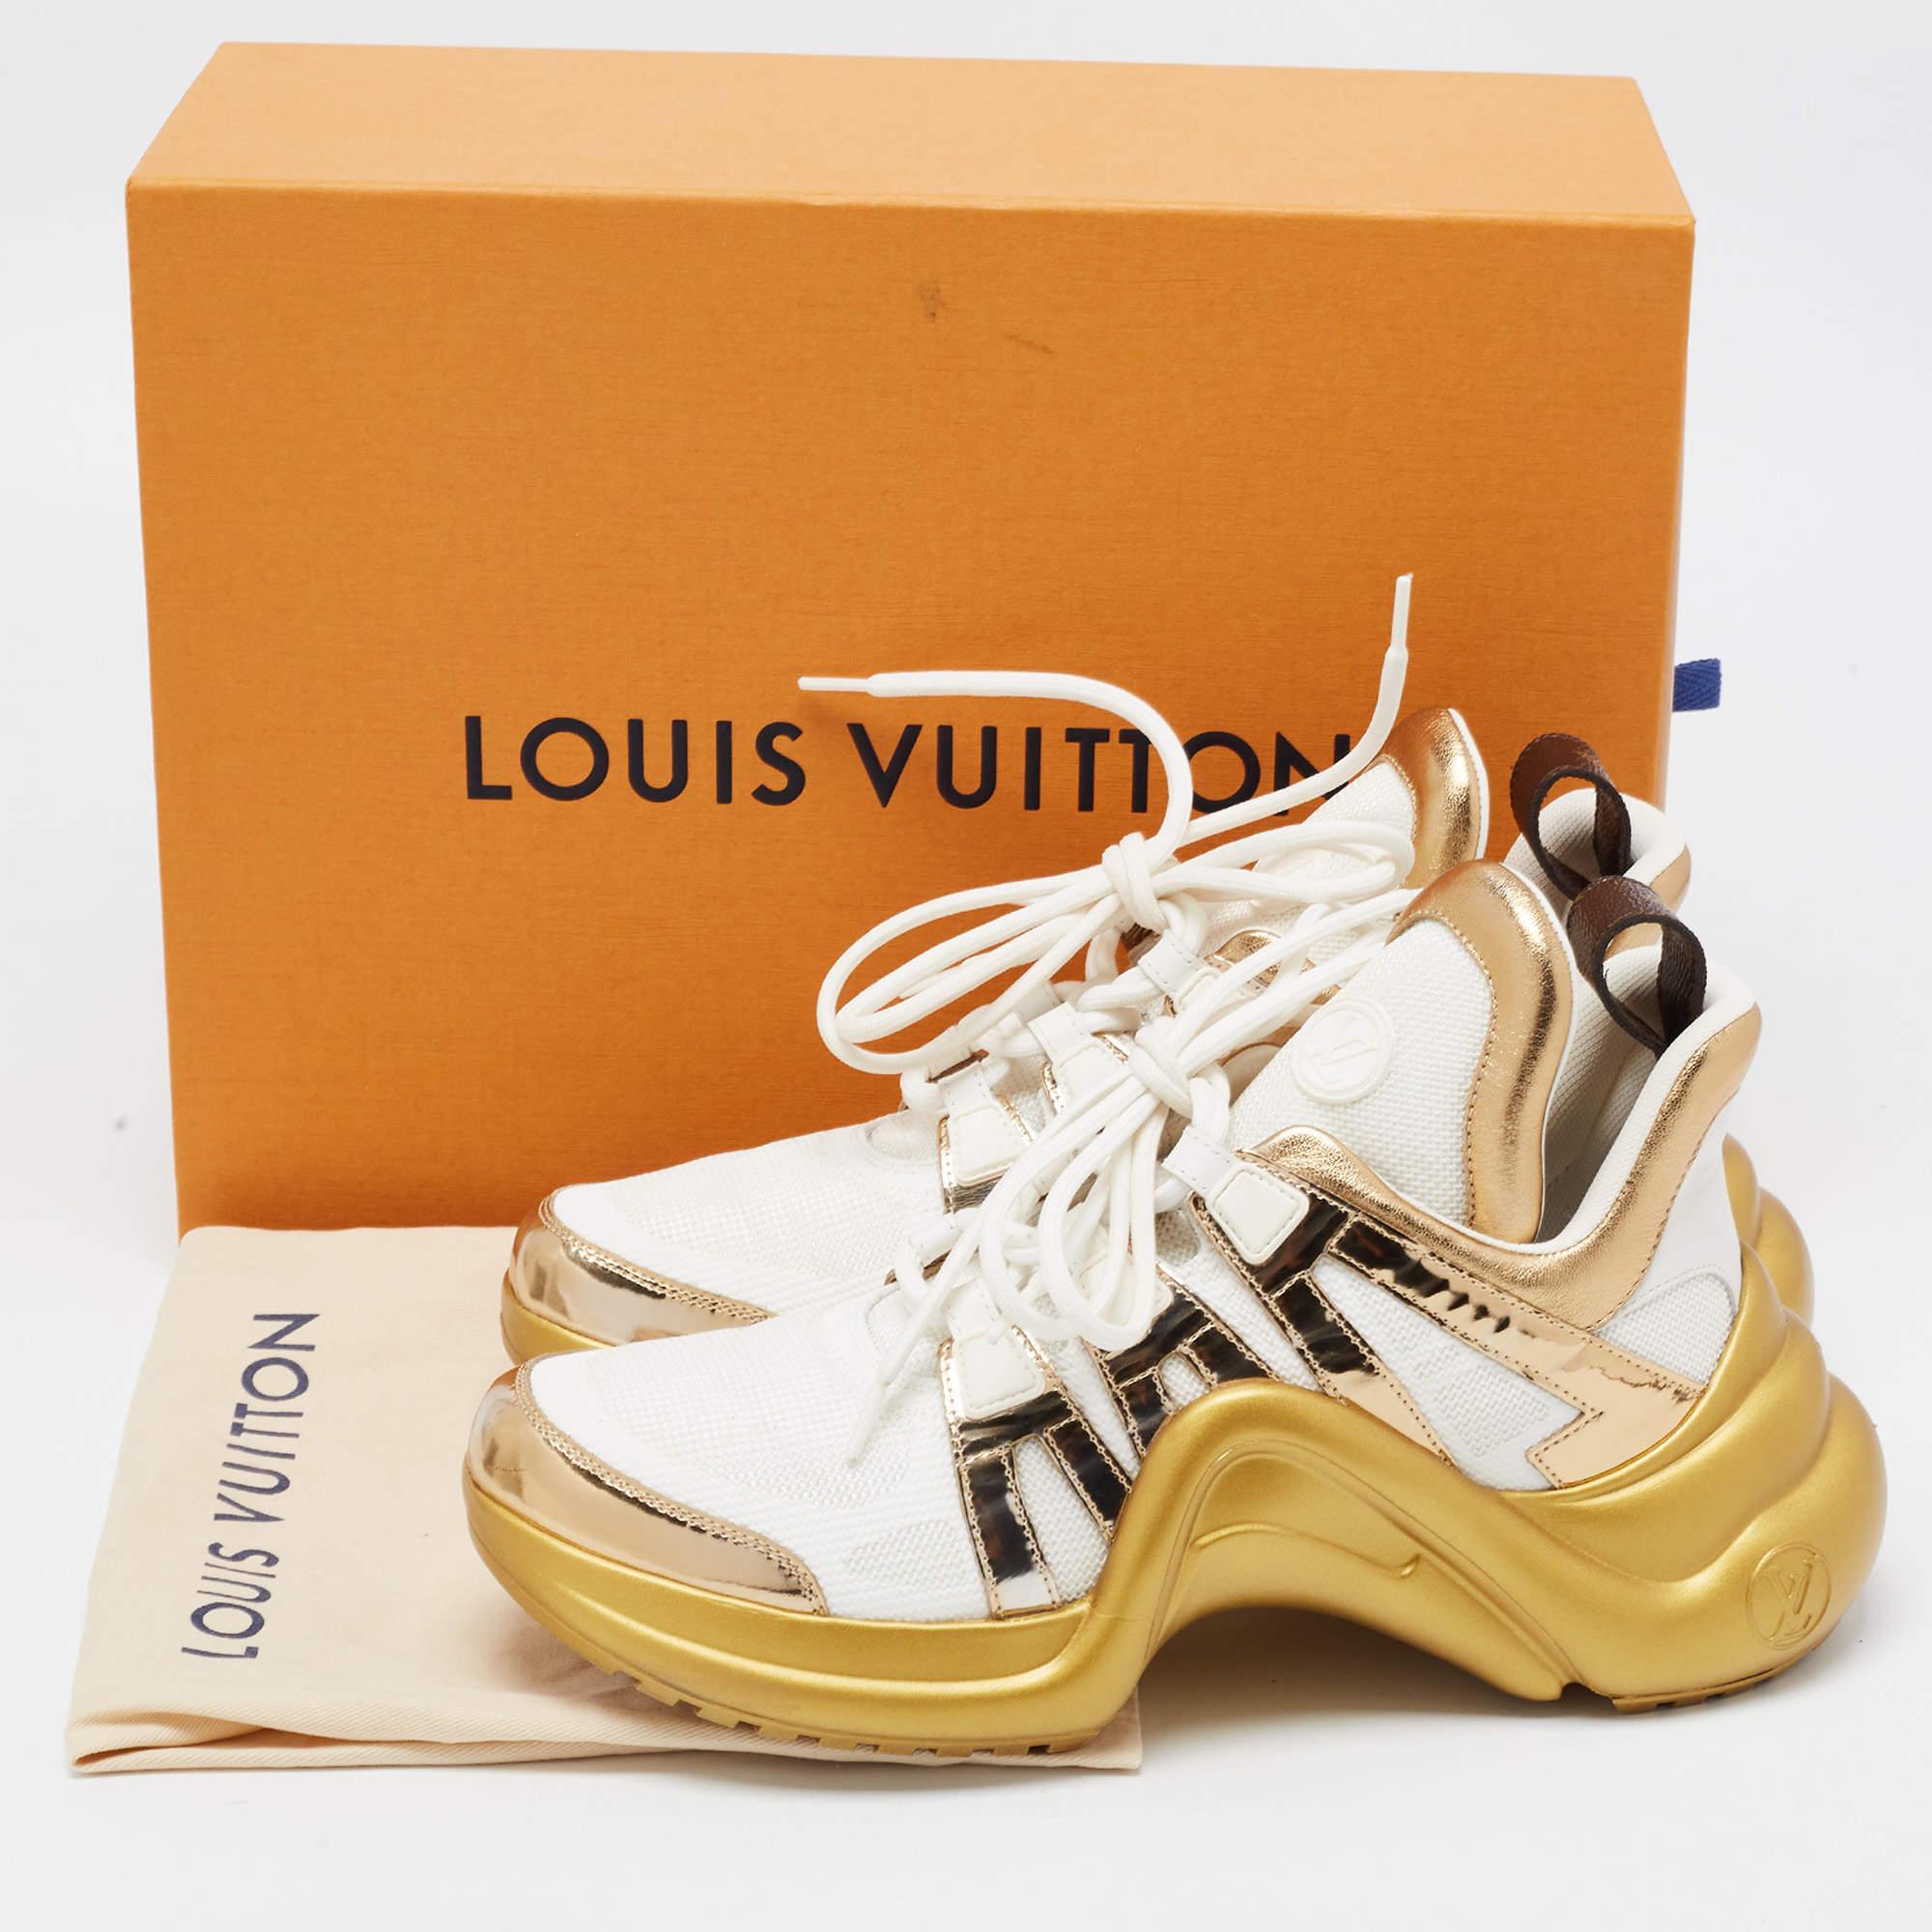 Louis Vuitton Nylon and Foil Leather Arclight Low Top Sneakers Size 39 5